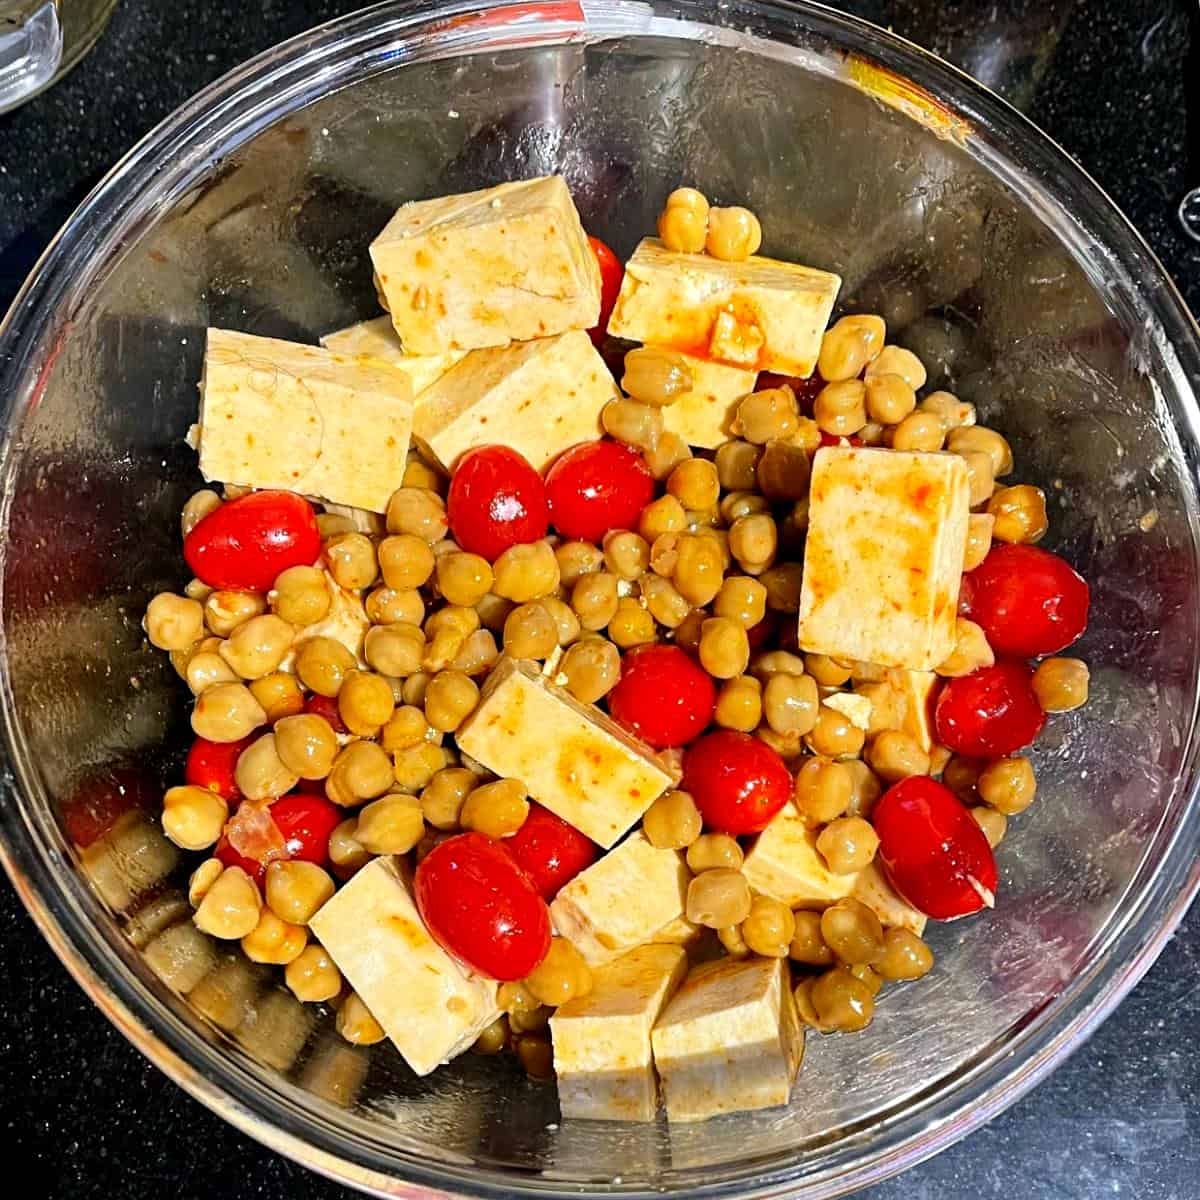 Tofu, chickpeas and cherry tomatoes mixed with sweet and spicy sauce in bowl.